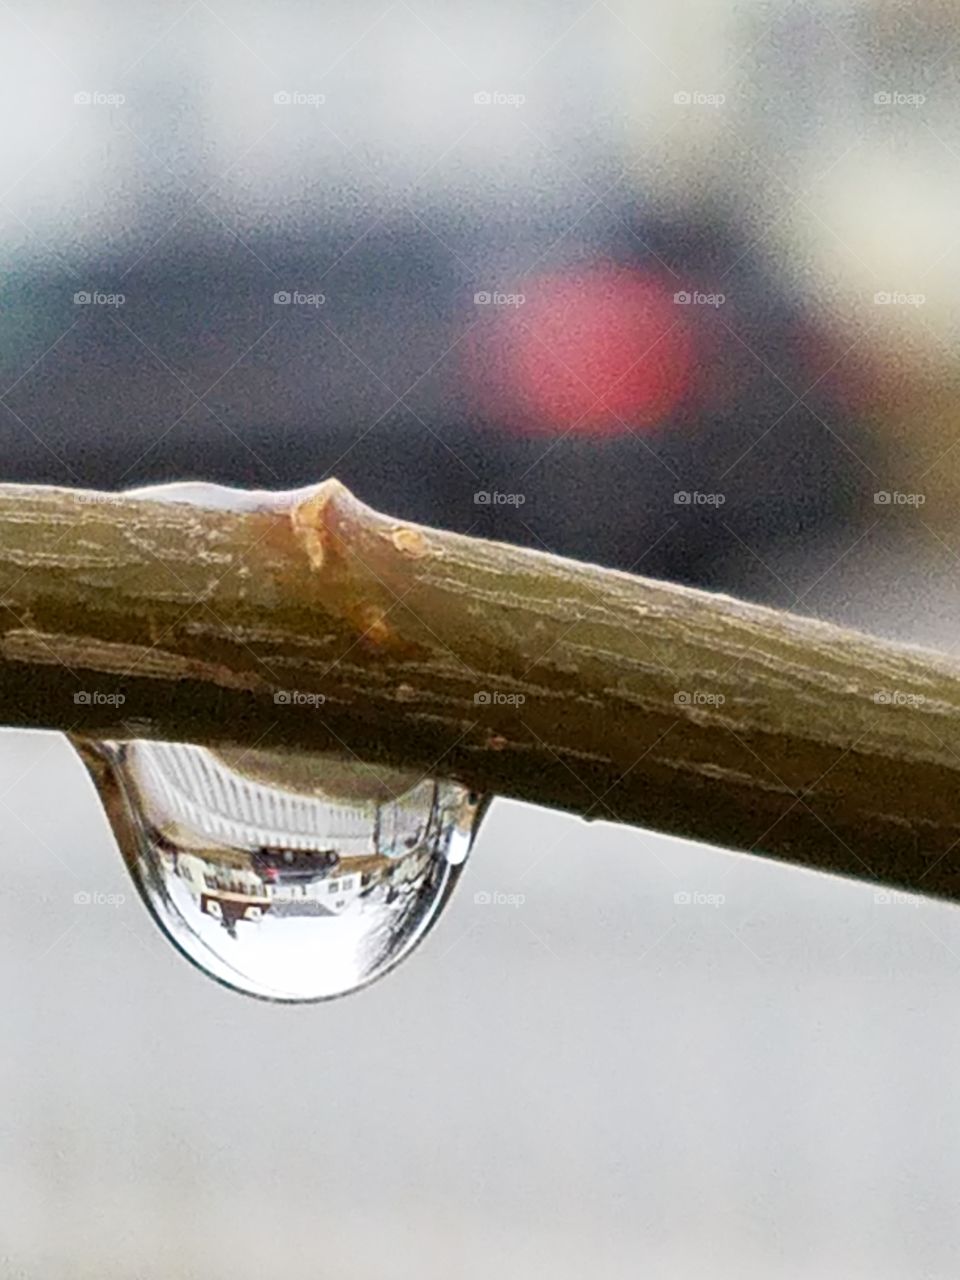 Reflections in a raindrop